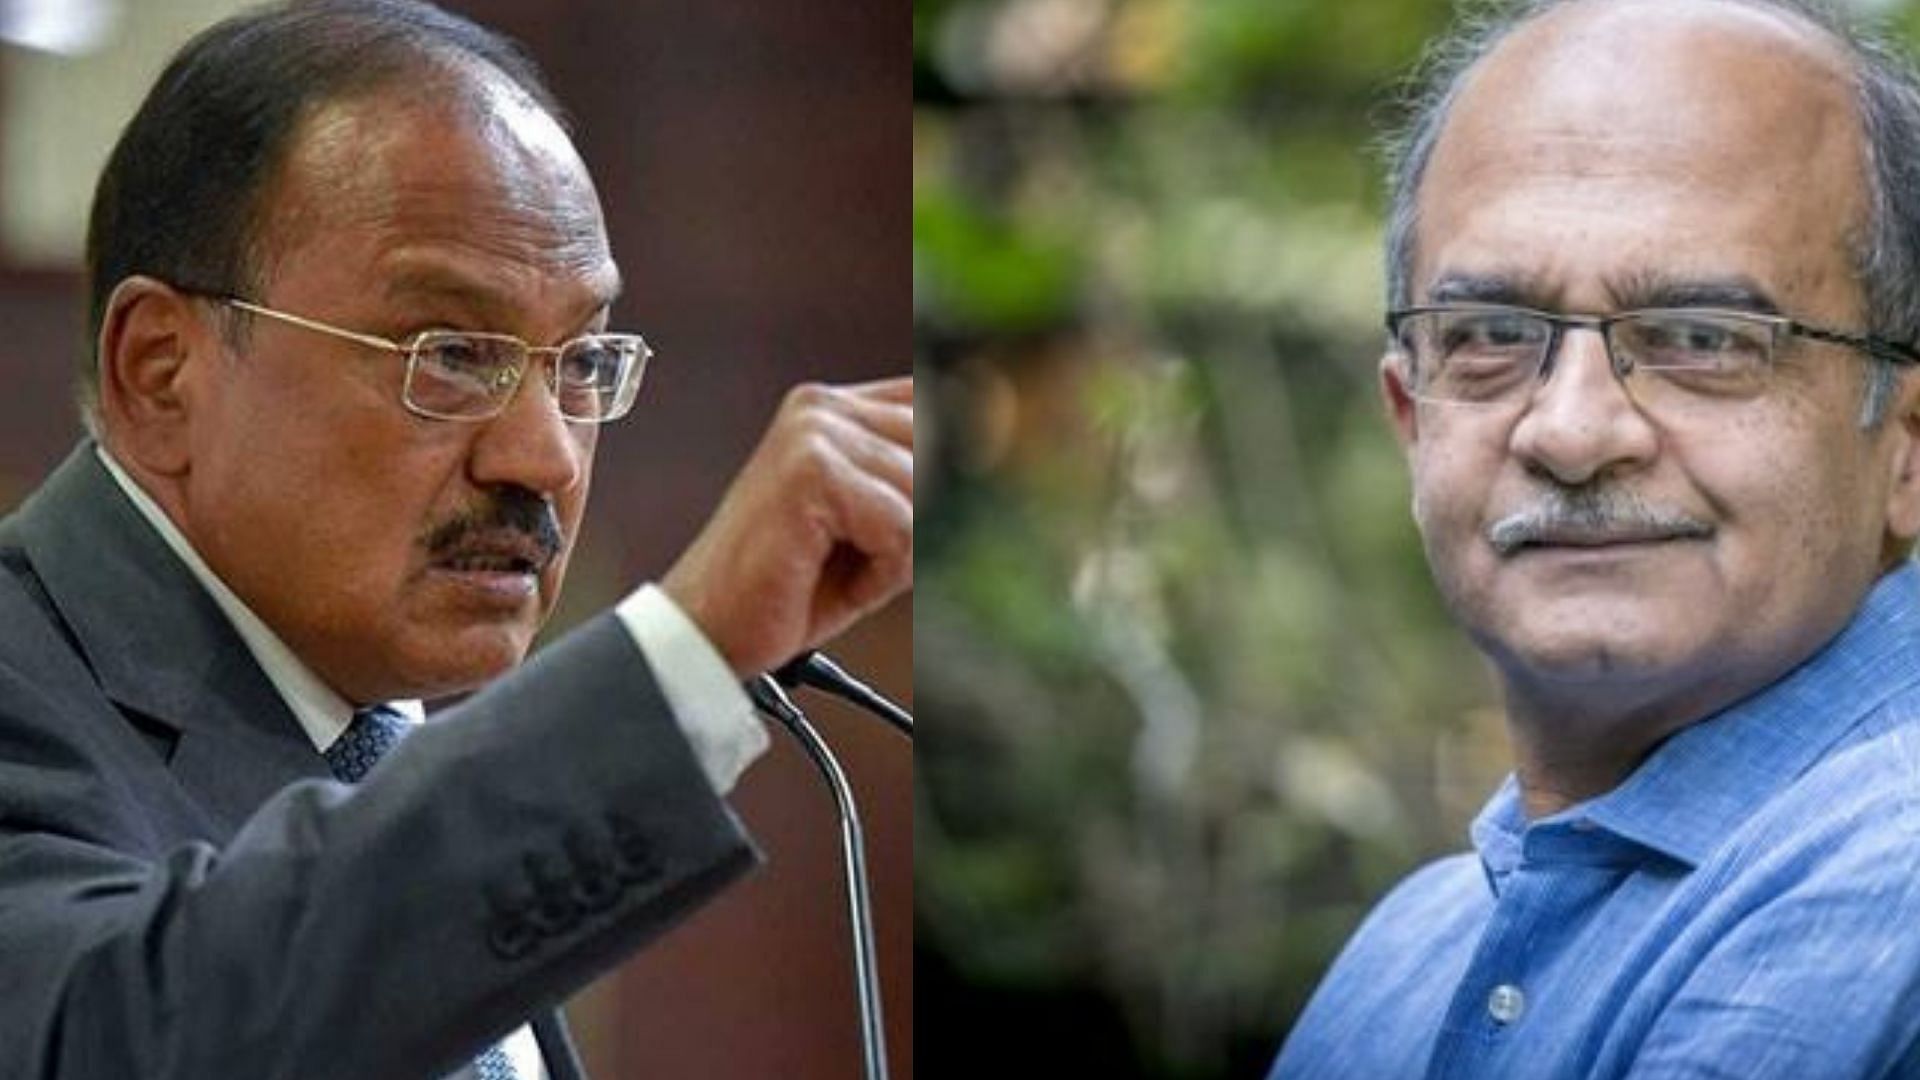 According to a note tweeted by Prashant Bhushan, Ajit Doval illegally negotiated with France about Rafale Deal.